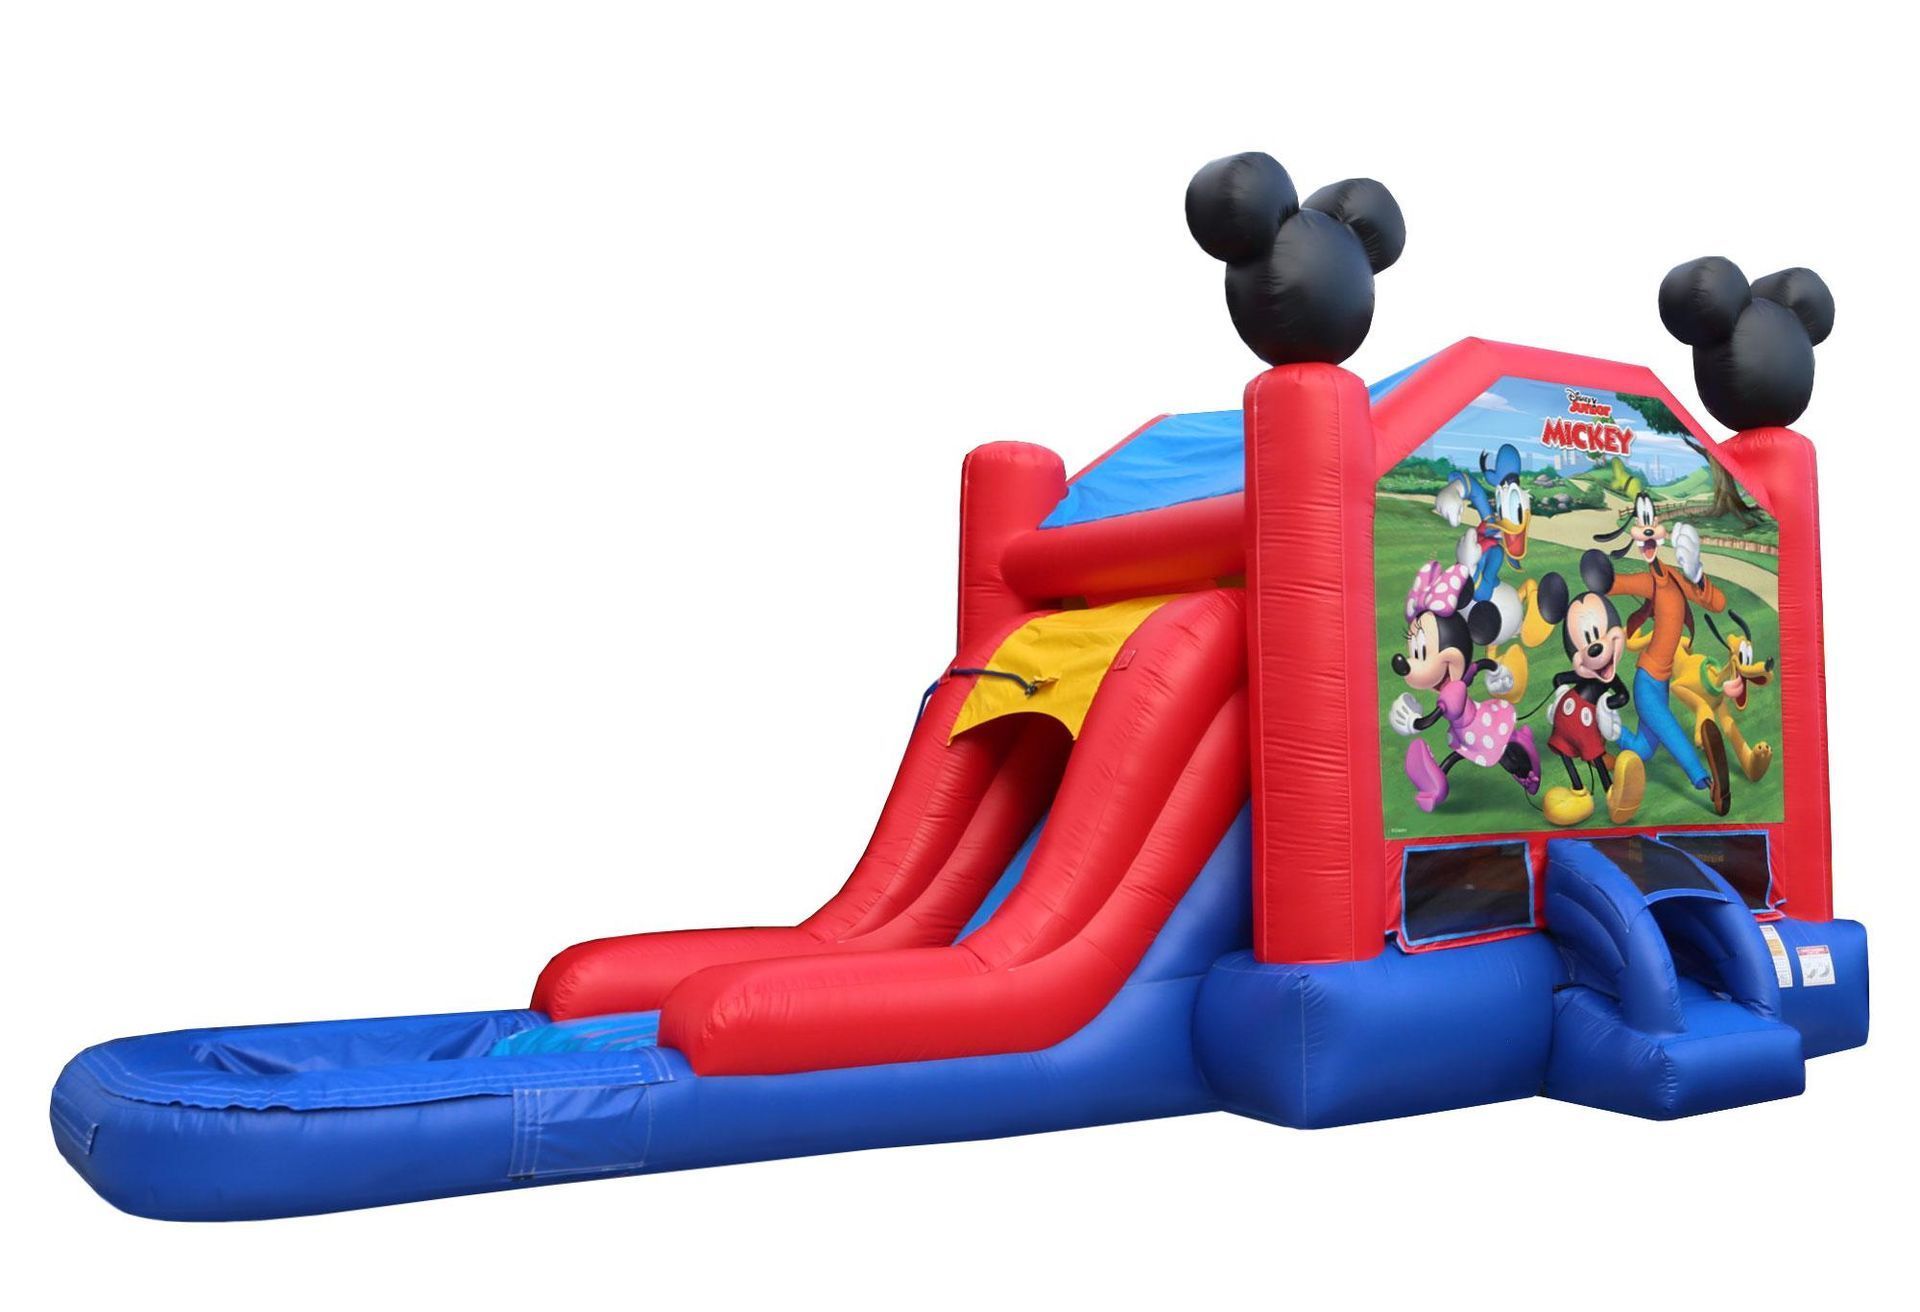 Mickey Mouse Bouncy House | Rancho Cucamonga, CA | Jam Jam House of Party Rentals 